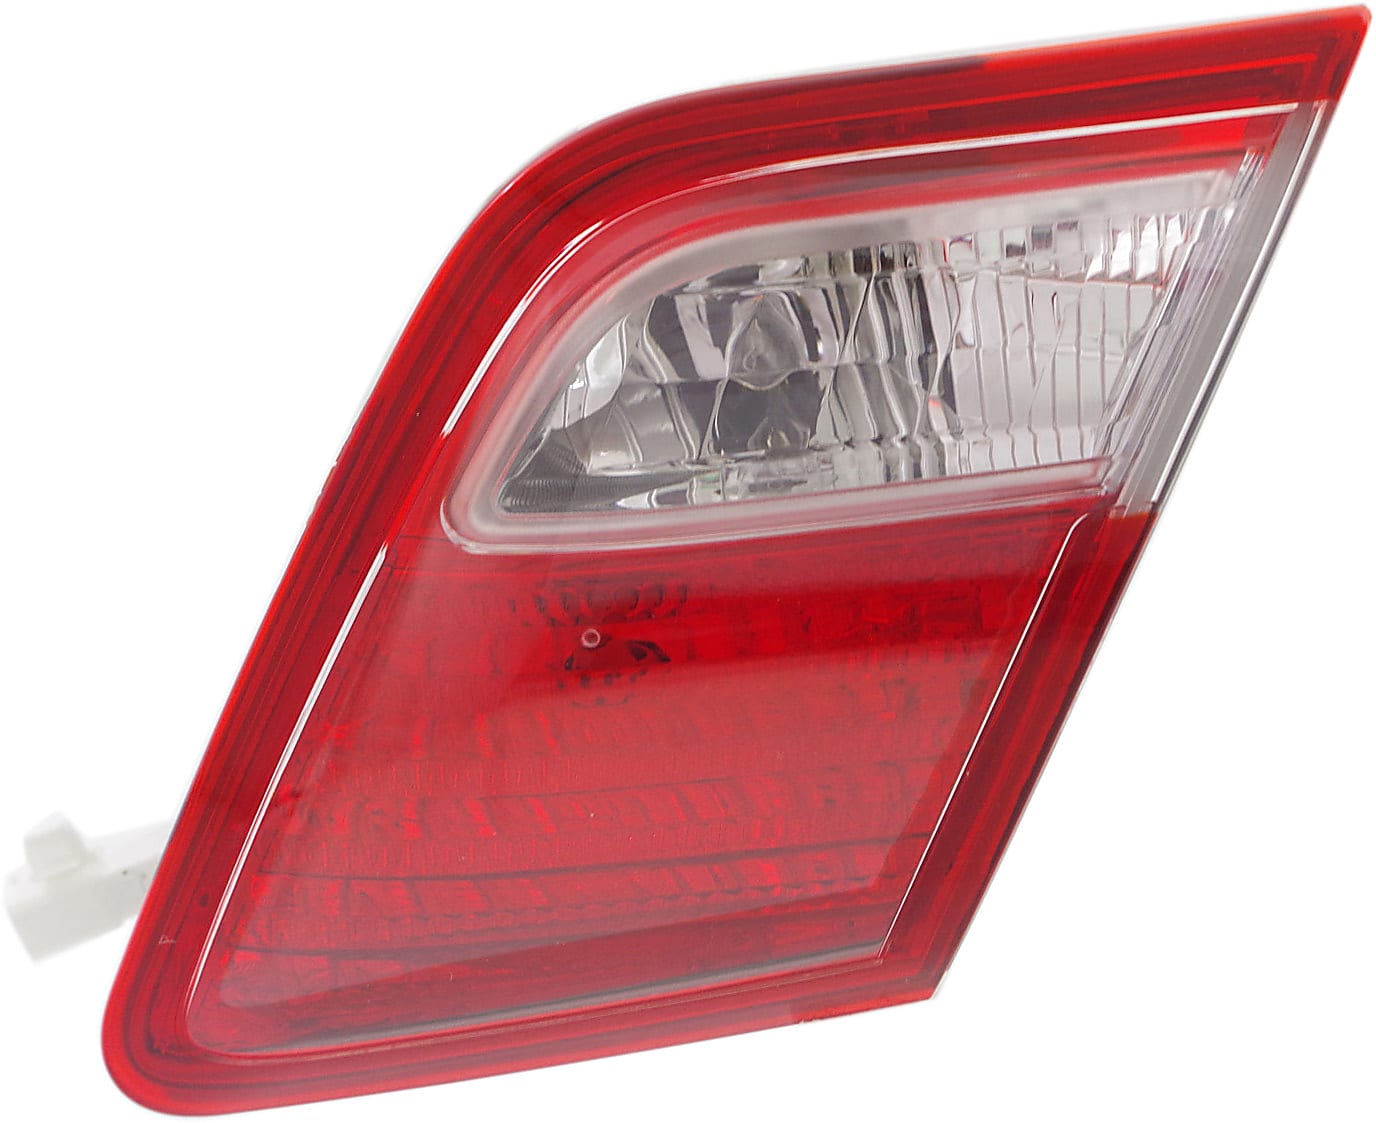 8159006120 For 2007-2009 Toyota Camry Rear Backup Tail Light Driver Side TO2818128 inner lamps 